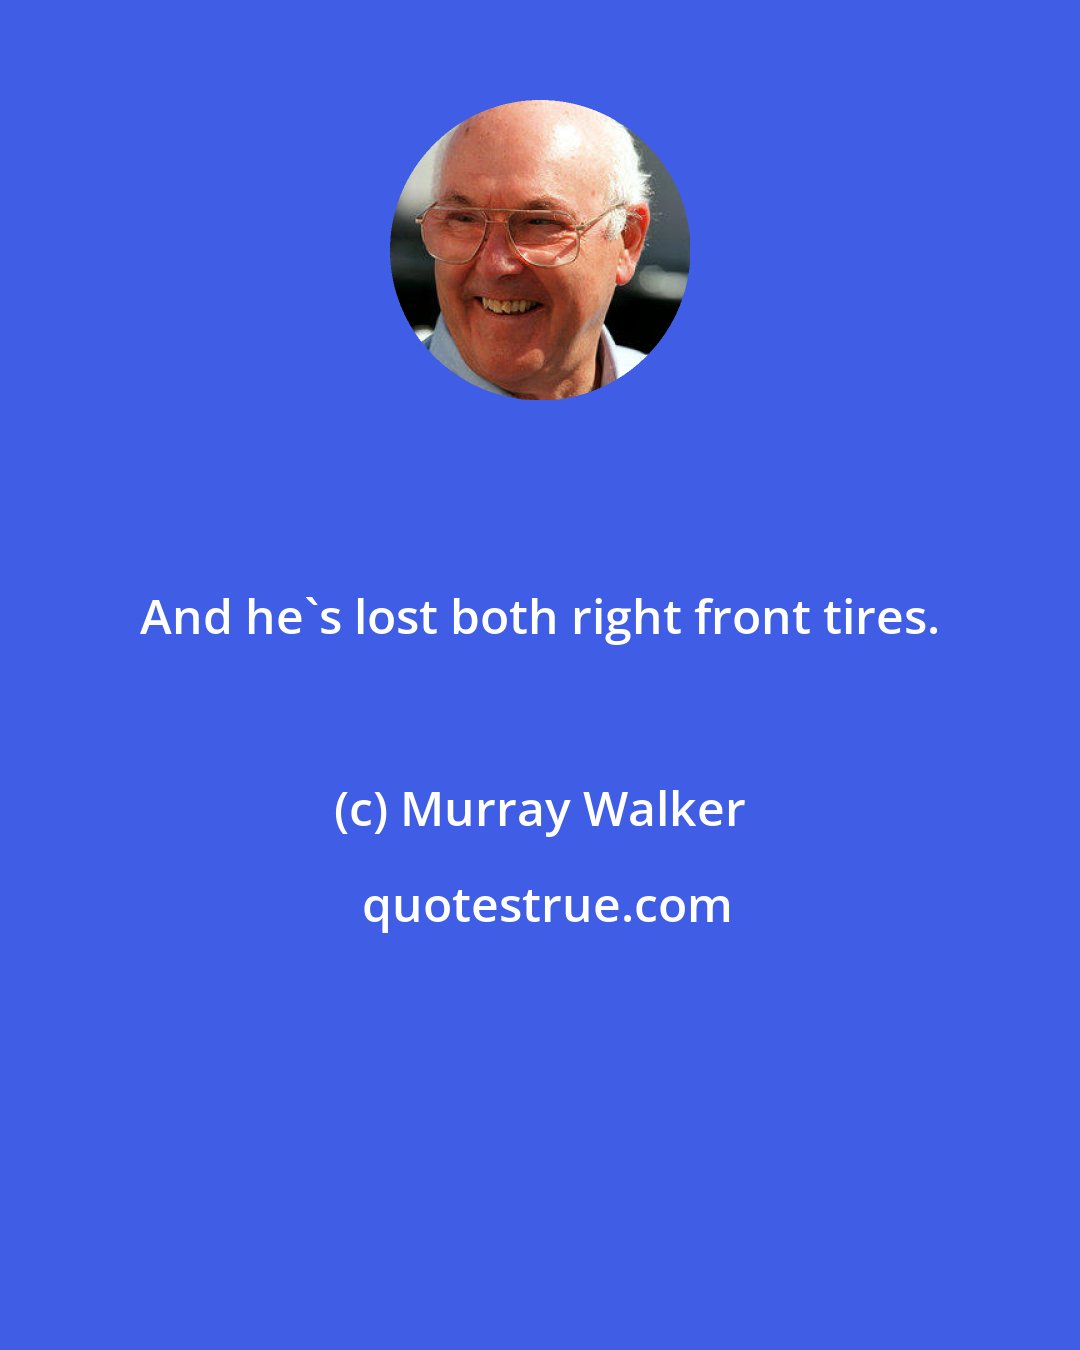 Murray Walker: And he's lost both right front tires.